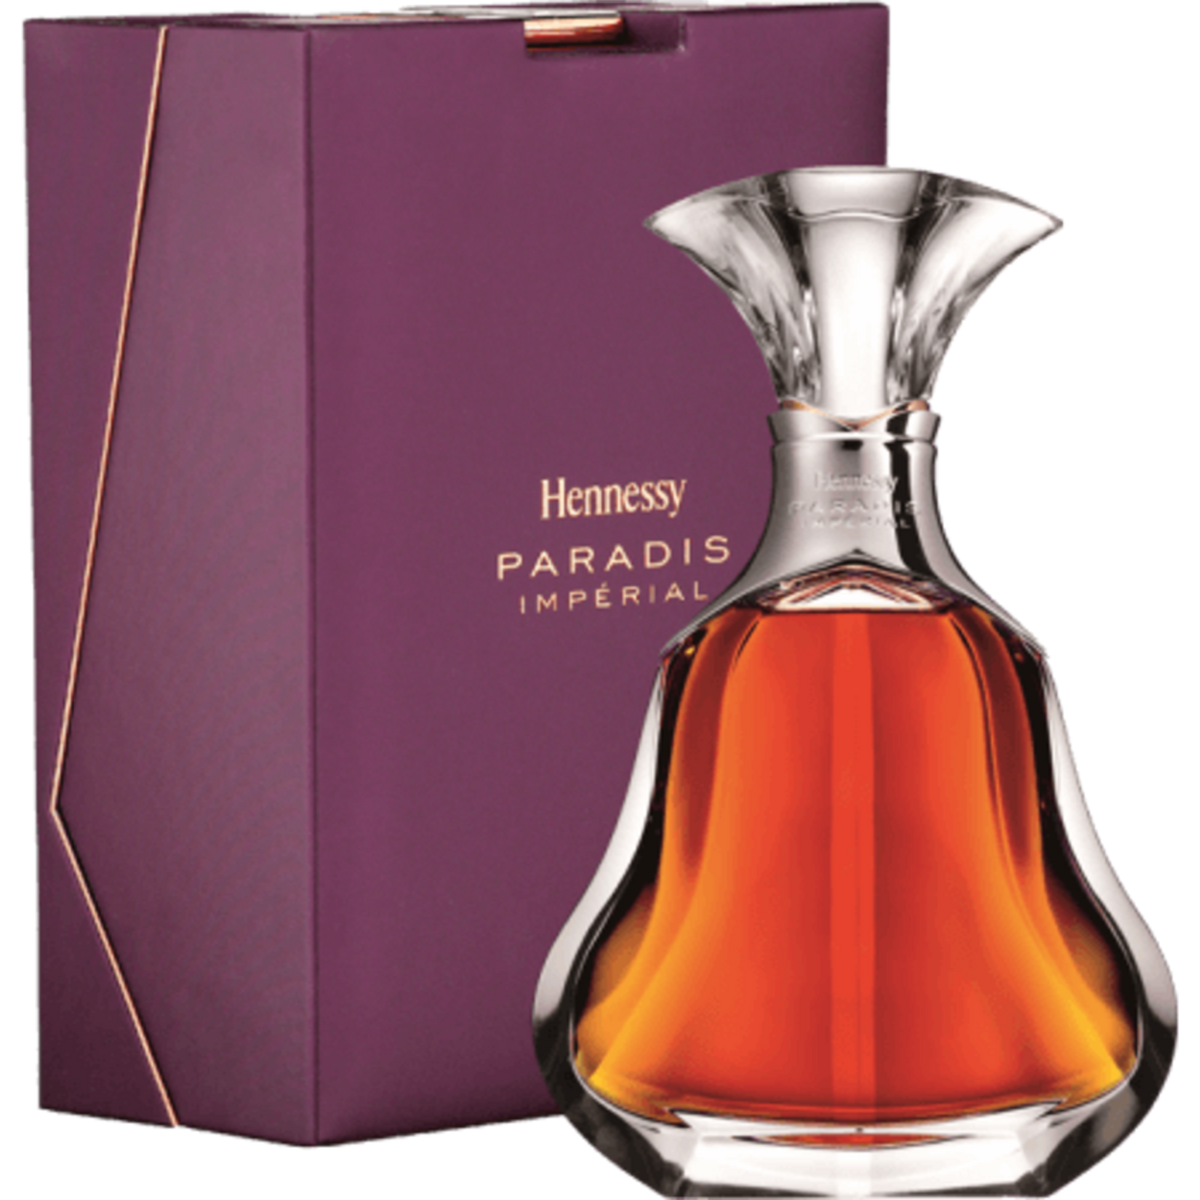 Hennessy Paradis Imperial Cognac  Third Base Market and Spirits – Third  Base Market & Spirits